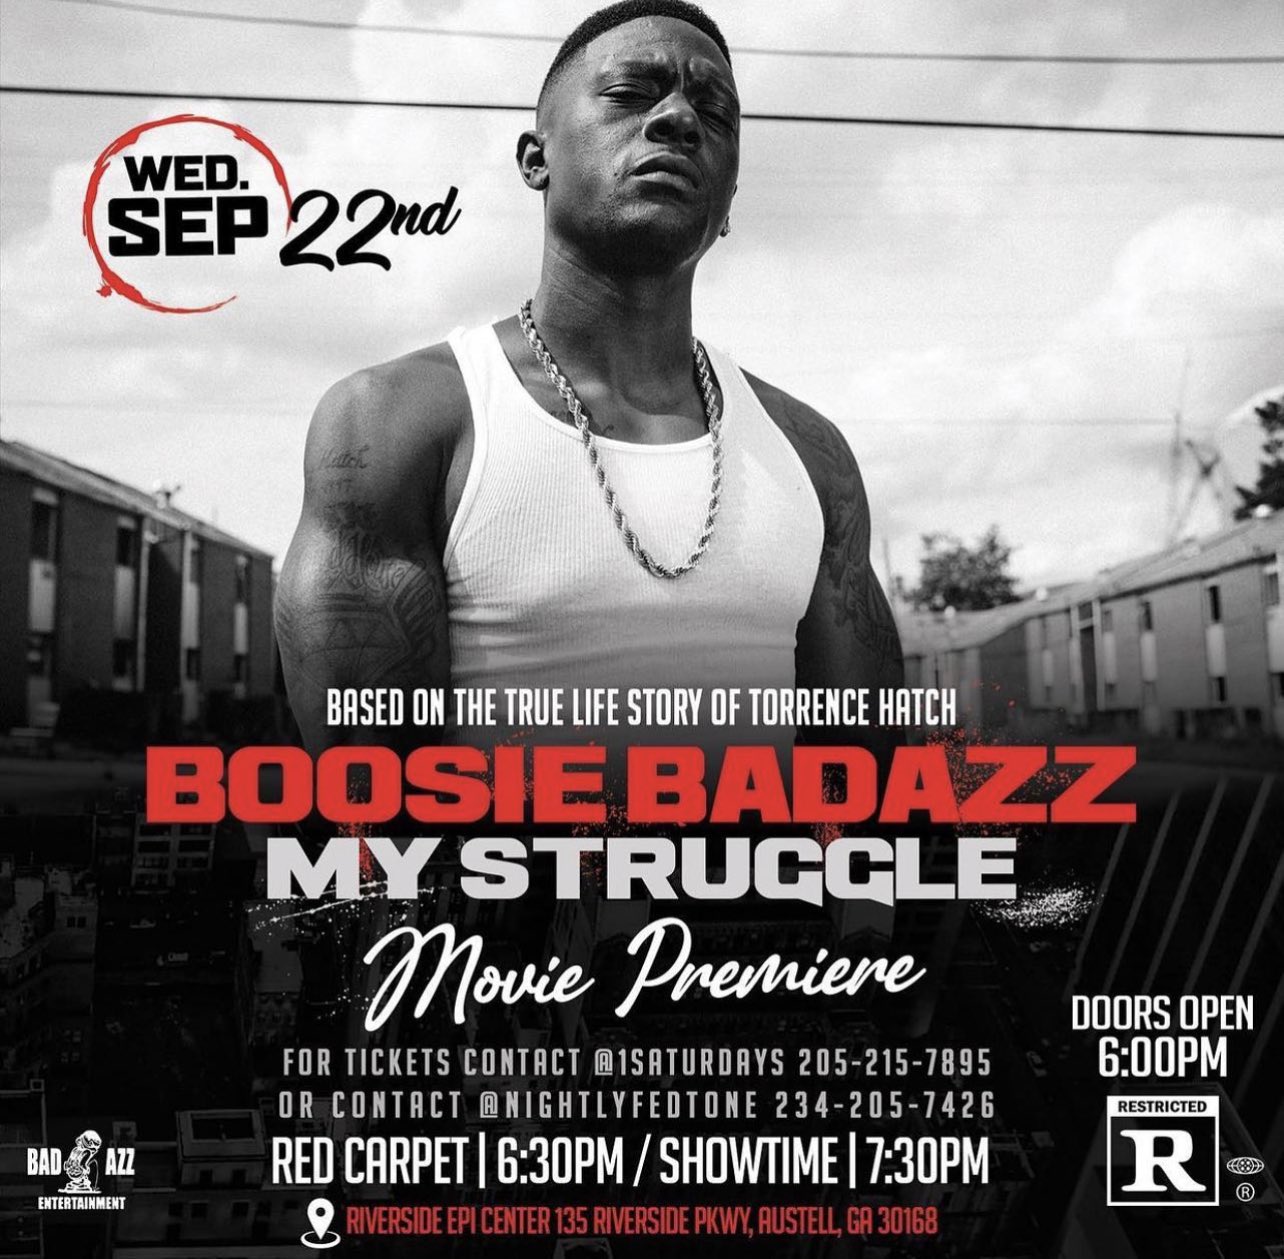 Boosie Badazz On Twitter Get Tickets Now Before Its To Late Movie Premiere September 22 Atl Riverside Epic Center Link N Bio For Tickets Link In Bio Hit Up 1saturdays Nightlyfedtone